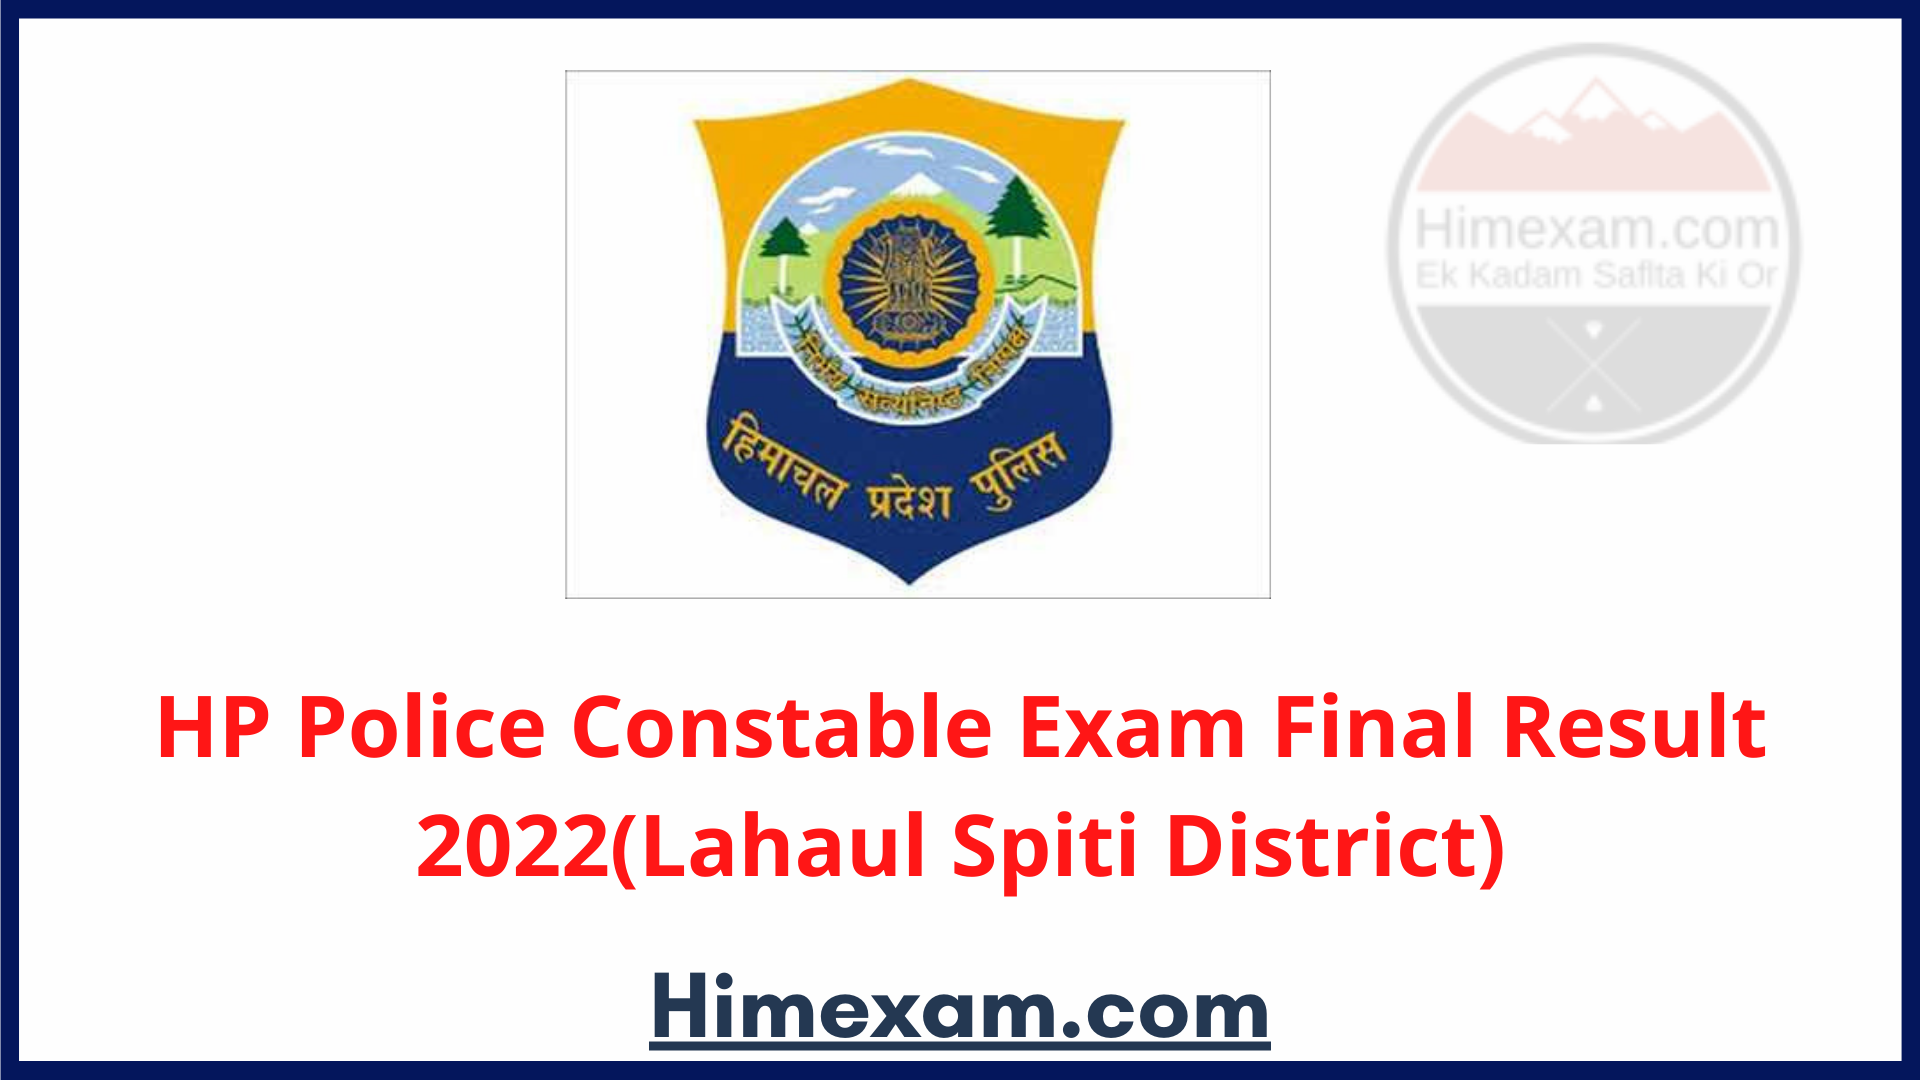 HP Police Constable Exam Final Result 2022(Lahaul Spiti District)